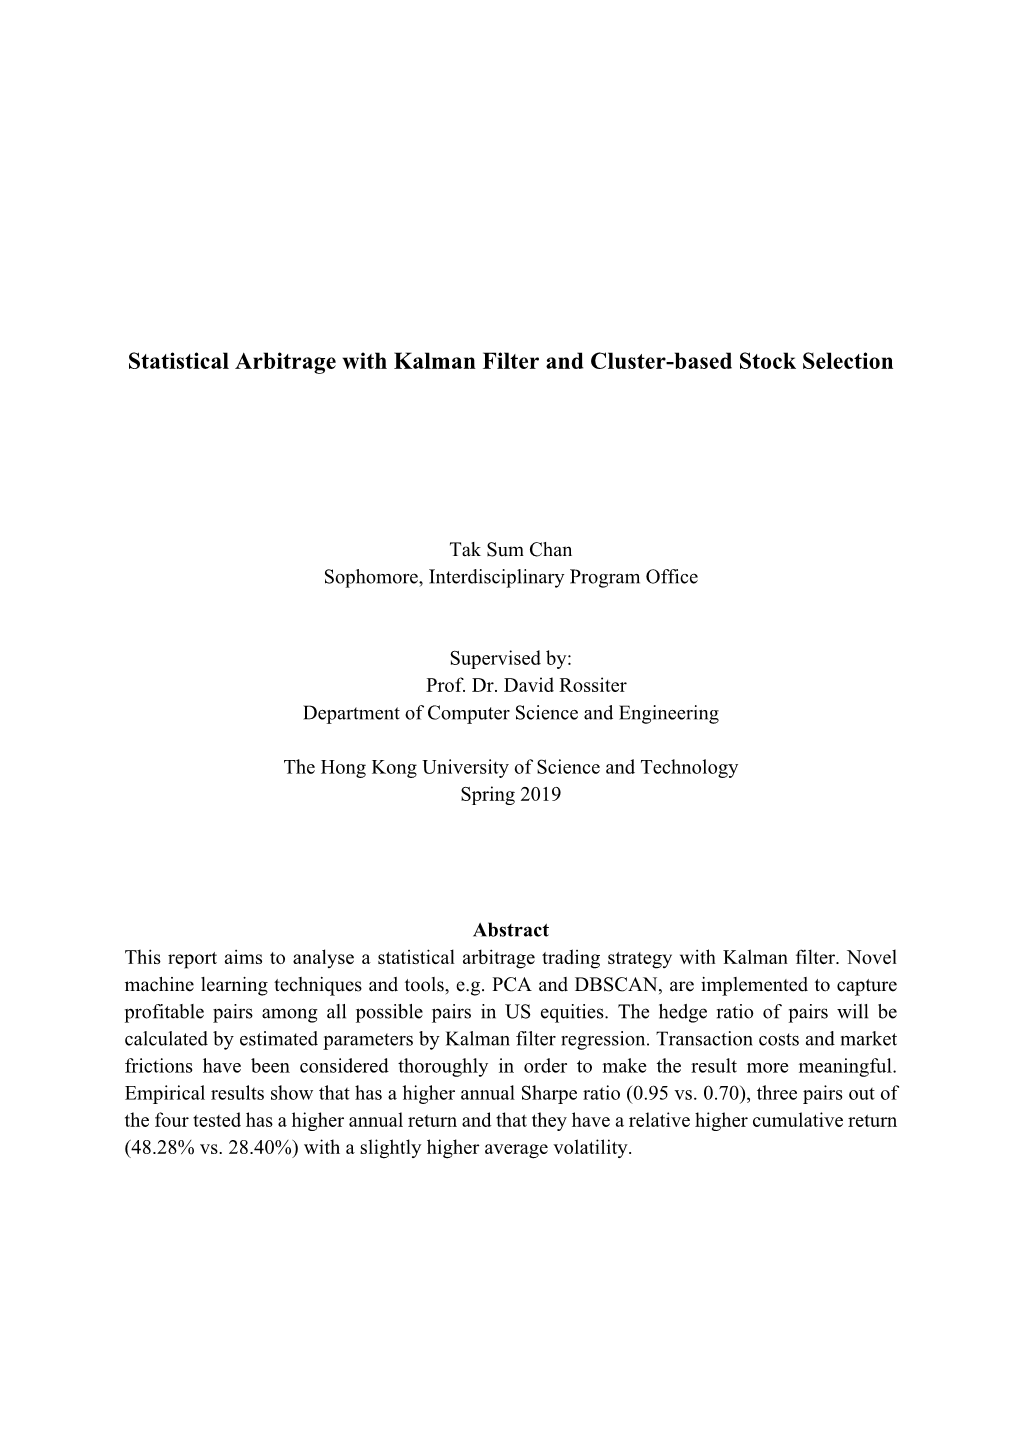 Statistical Arbitrage with Kalman Filter and Cluster-Based Stock Selection